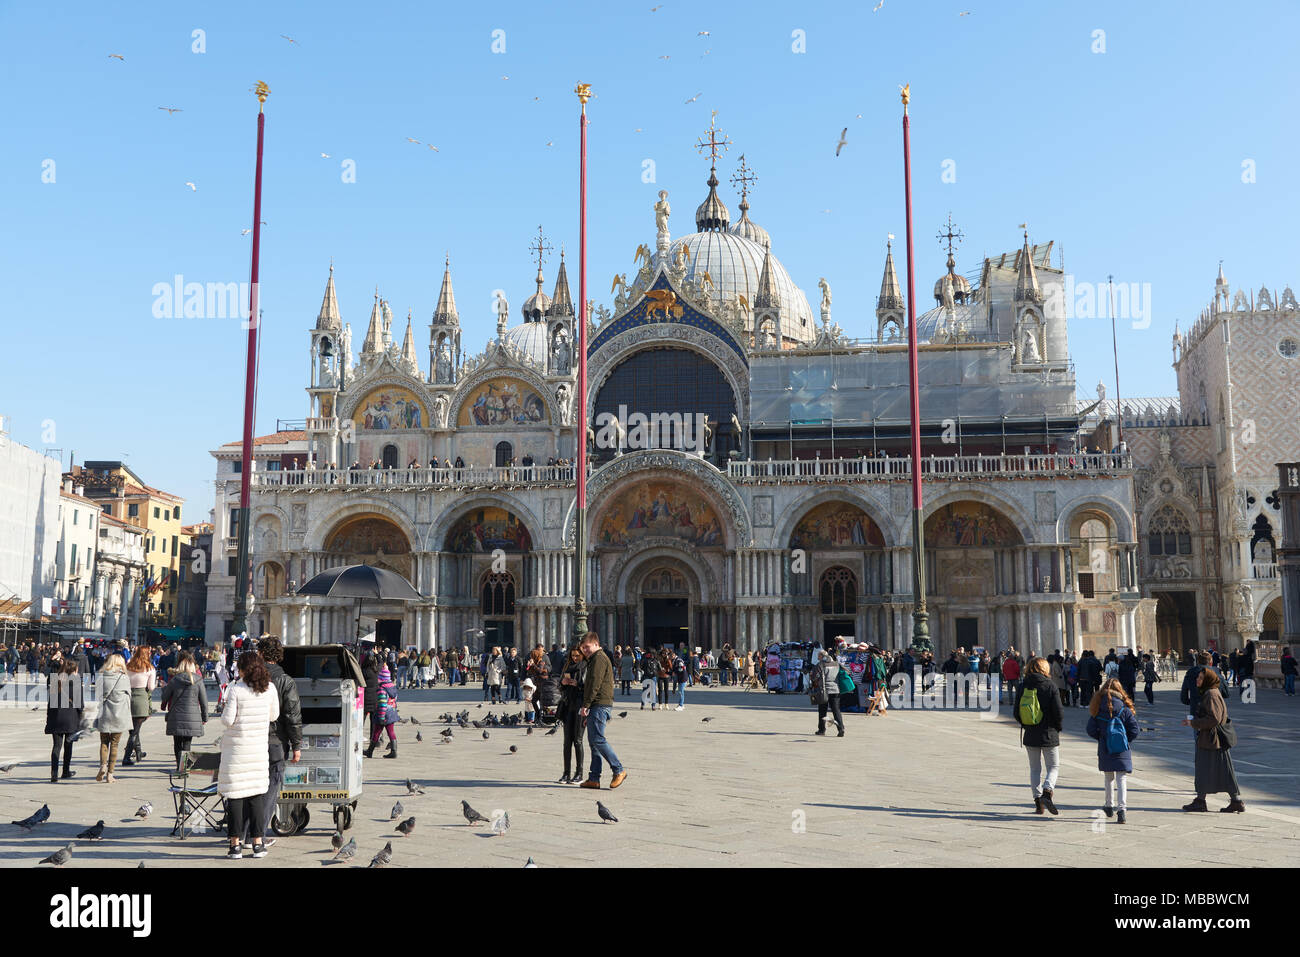 Venice, Italy - Febuary 19, 2016: St Mark's Basilica (Basilica Cattedrale Patriarcale di San Marco), a Roman Catholic Archdiocese of Venice. It is one Stock Photo